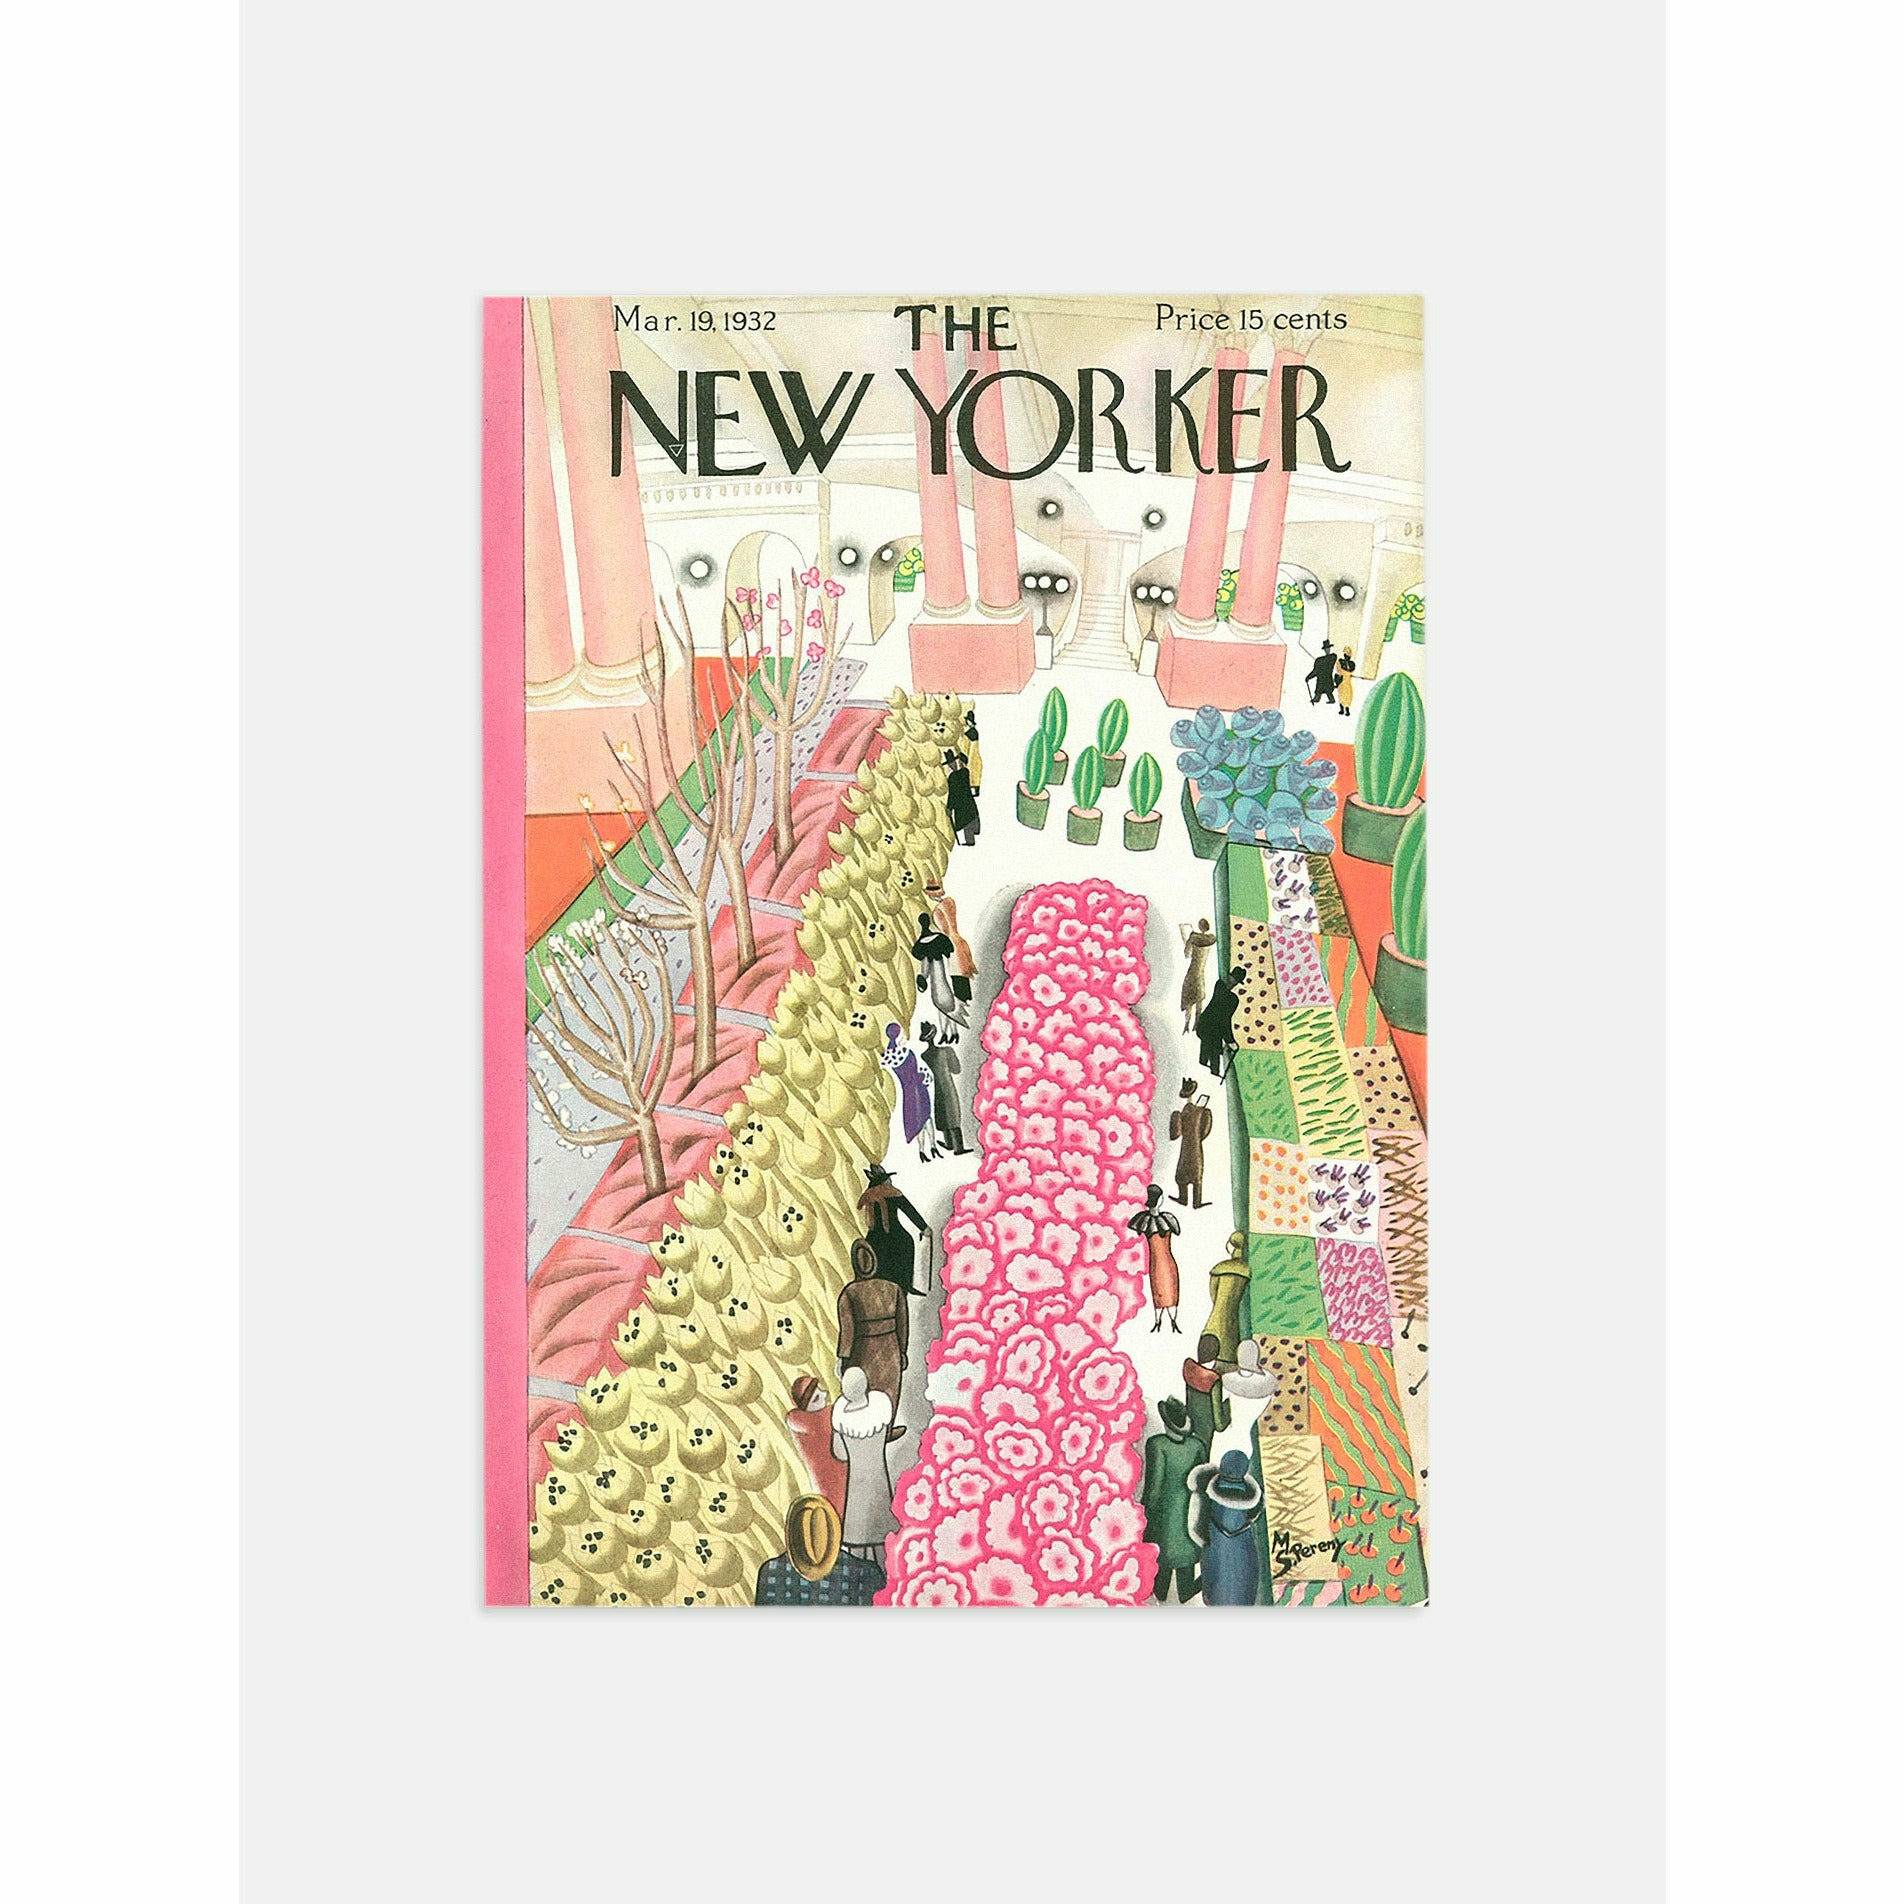 The New Yorker Mar 19, 1932